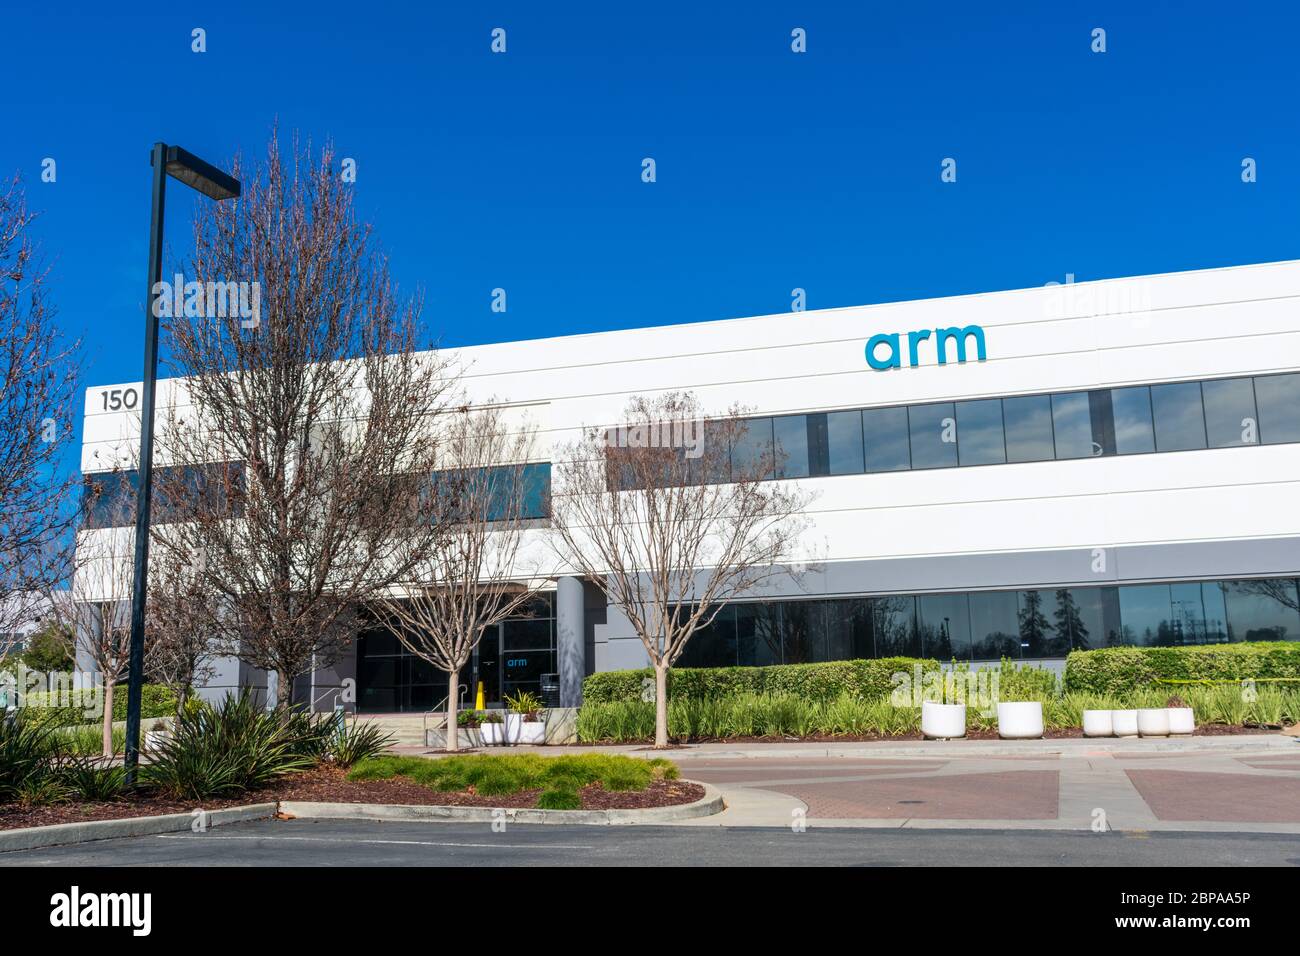 Arm Holdings headquarters in Silicon Valley. Arm is a global semiconductor and software design company - San Jose, California, USA - 2020 Stock Photo - Alamy